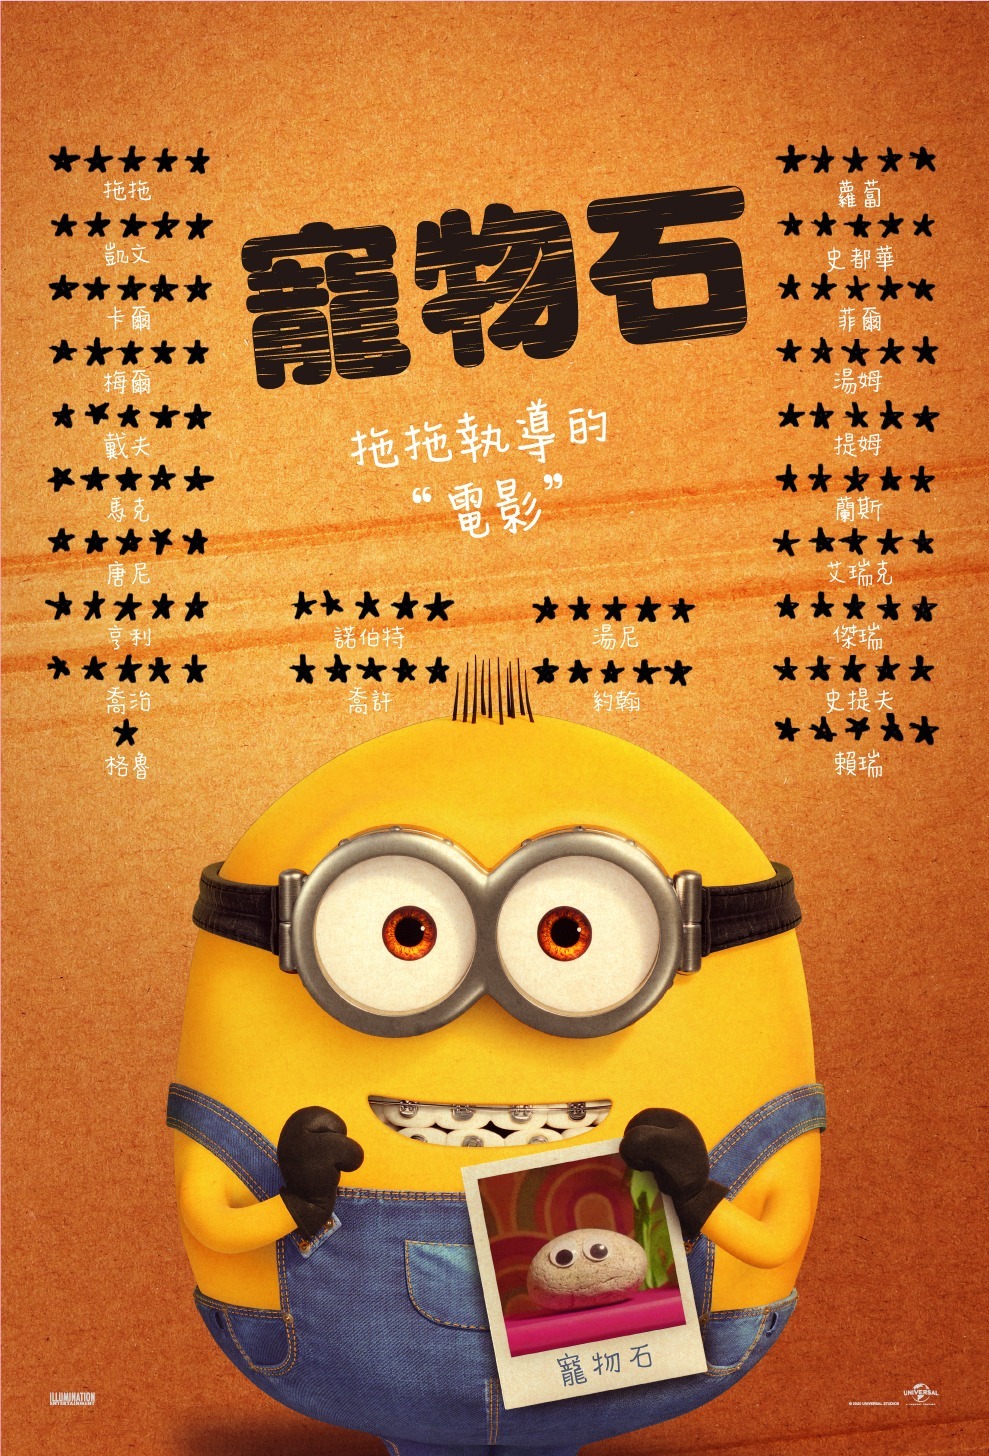 Extra Large Movie Poster Image for Minions: The Rise of Gru (#41 of 45)